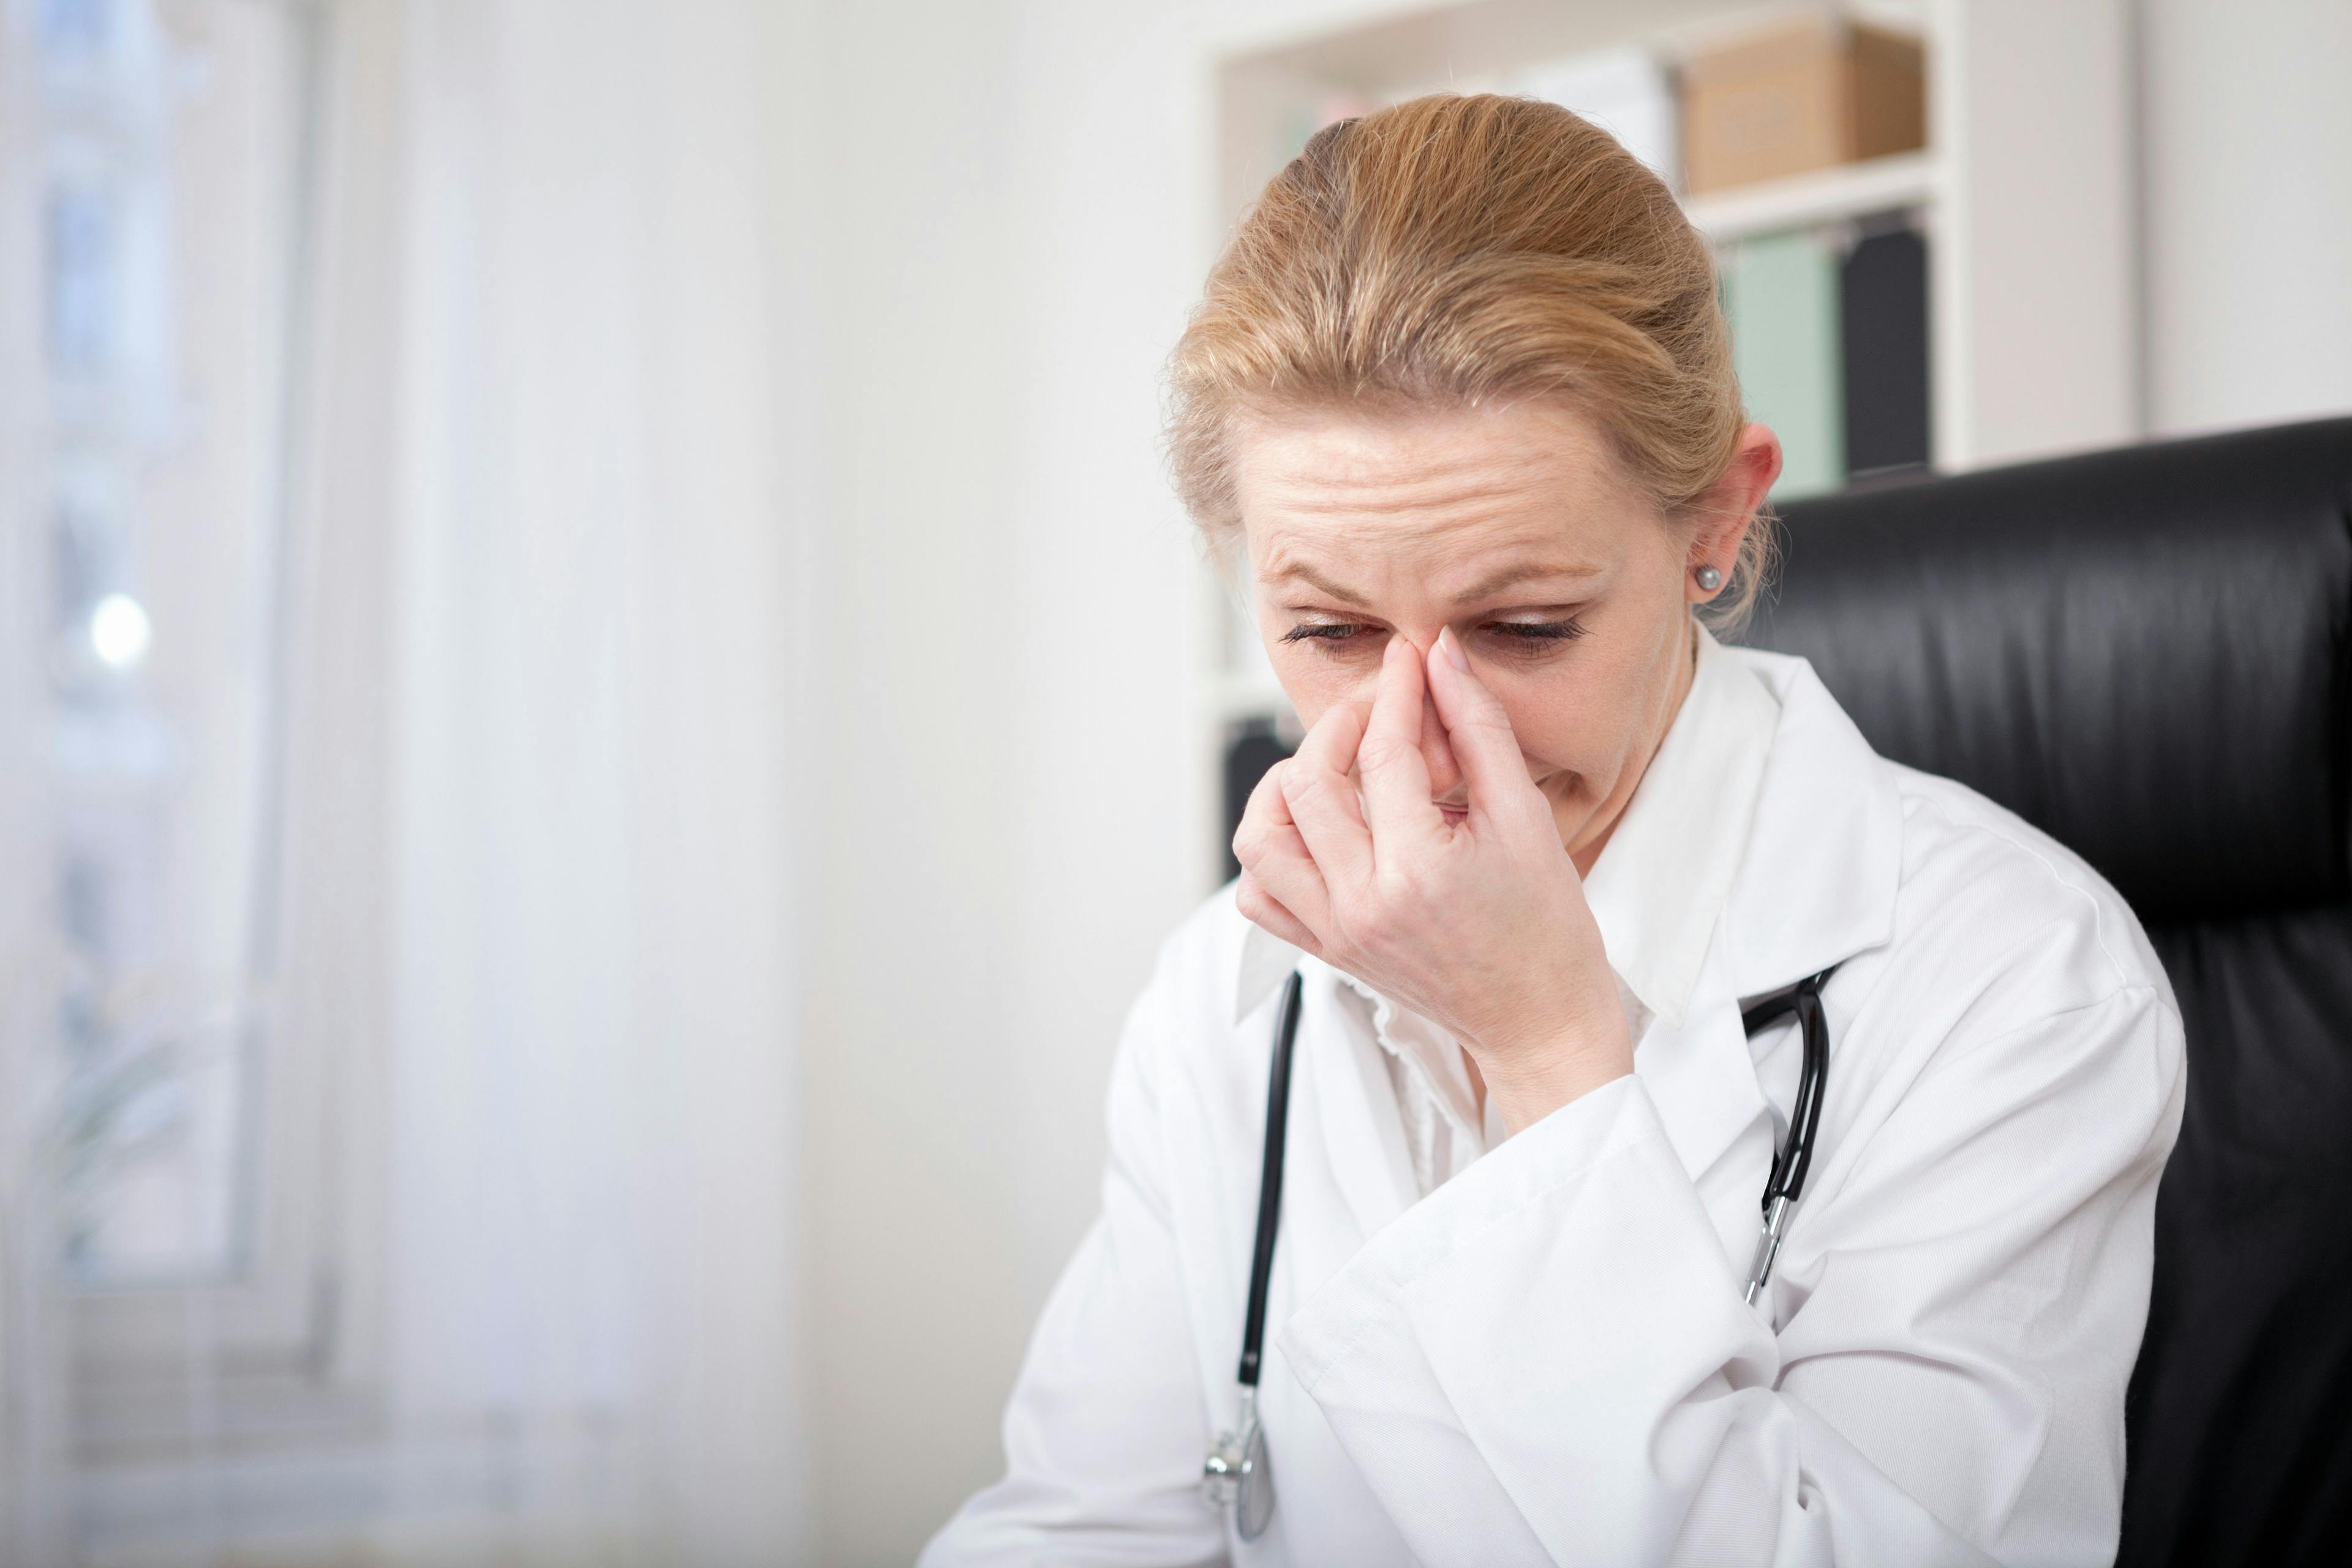 Burnout among doctors continuing to rise, survey finds